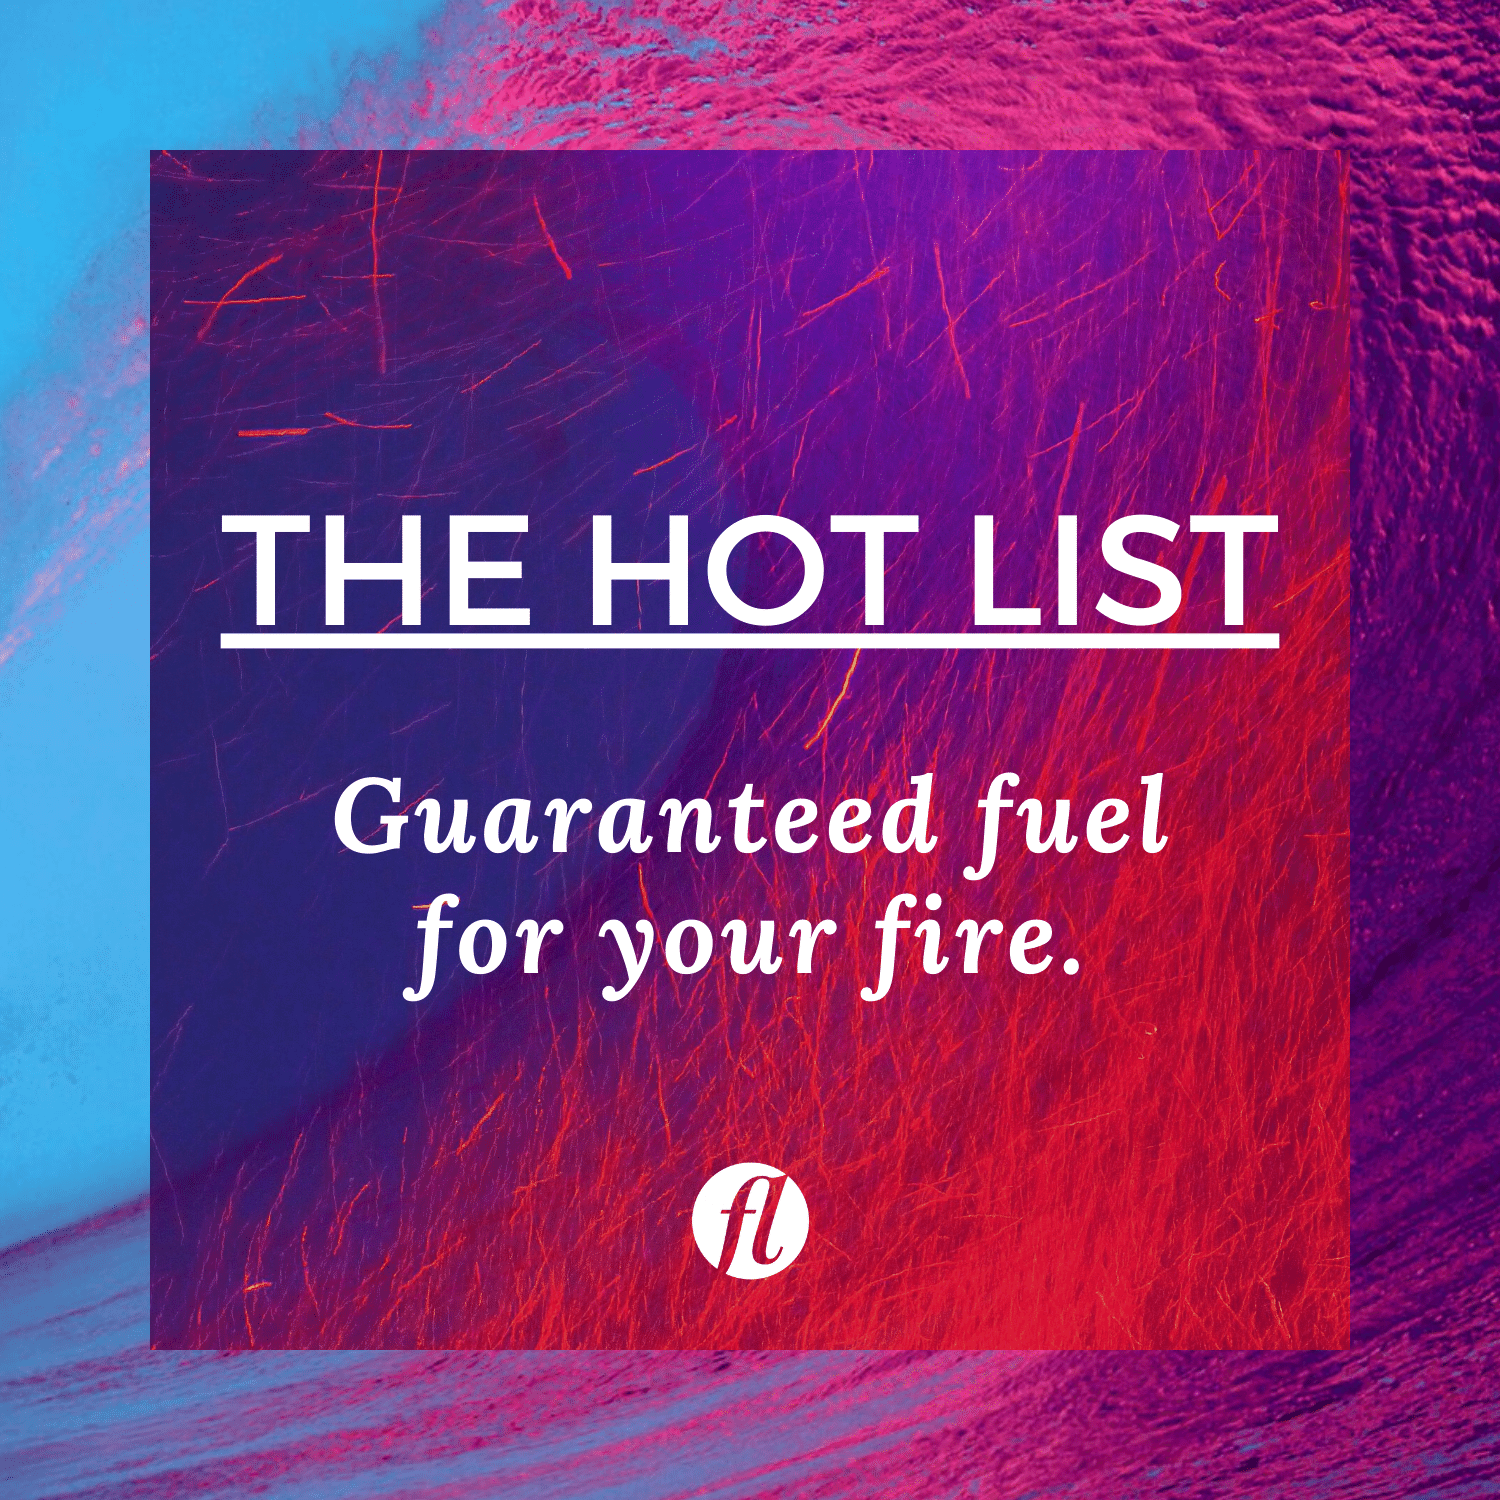 fire and ocean wave in purples, blues, and reds with white type and FL logo. "THE HOT LIST"